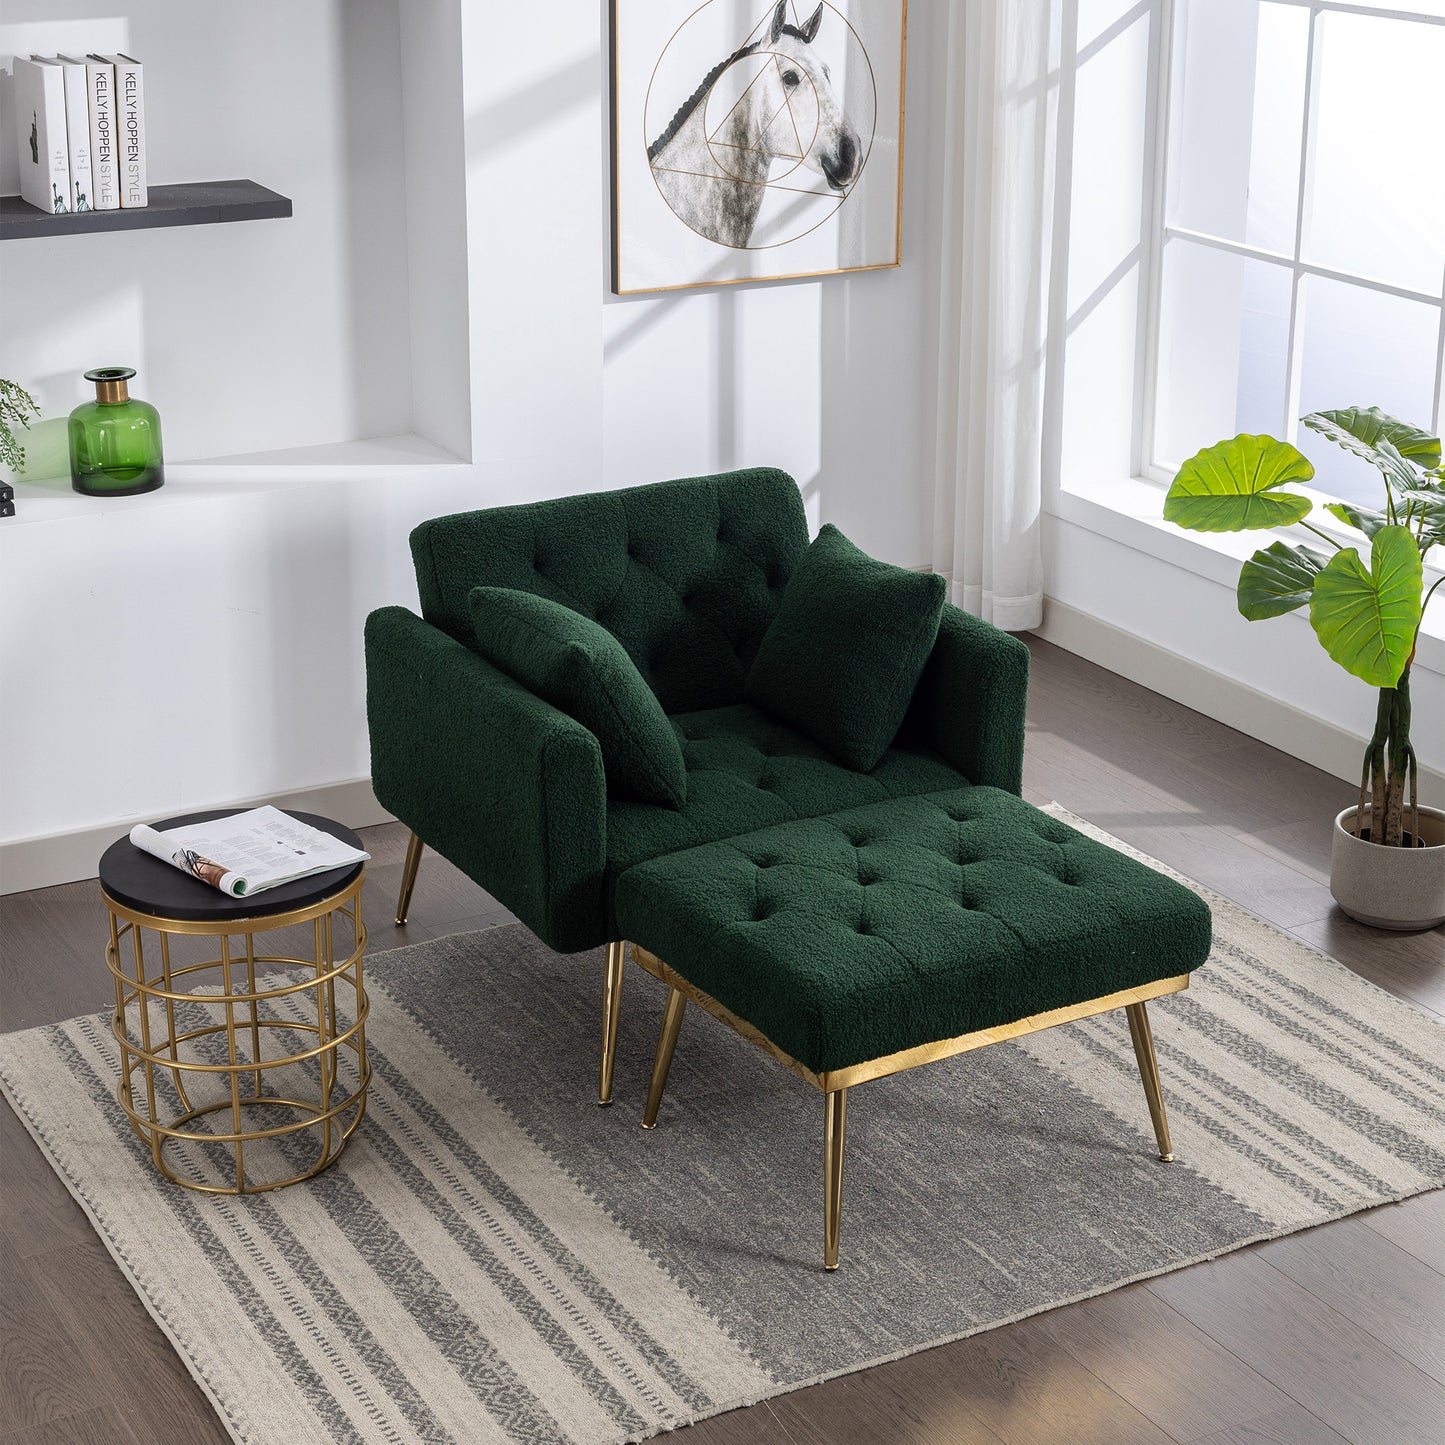 36.61'' Wide Modern Accent Chair With 3 Positions Adjustable Backrest, Tufted Chaise Lounge Chair, Single Recliner Armchair With Ottoman And Gold Legs For Living Room, Bedroom (Green) - Enova Luxe Home Store